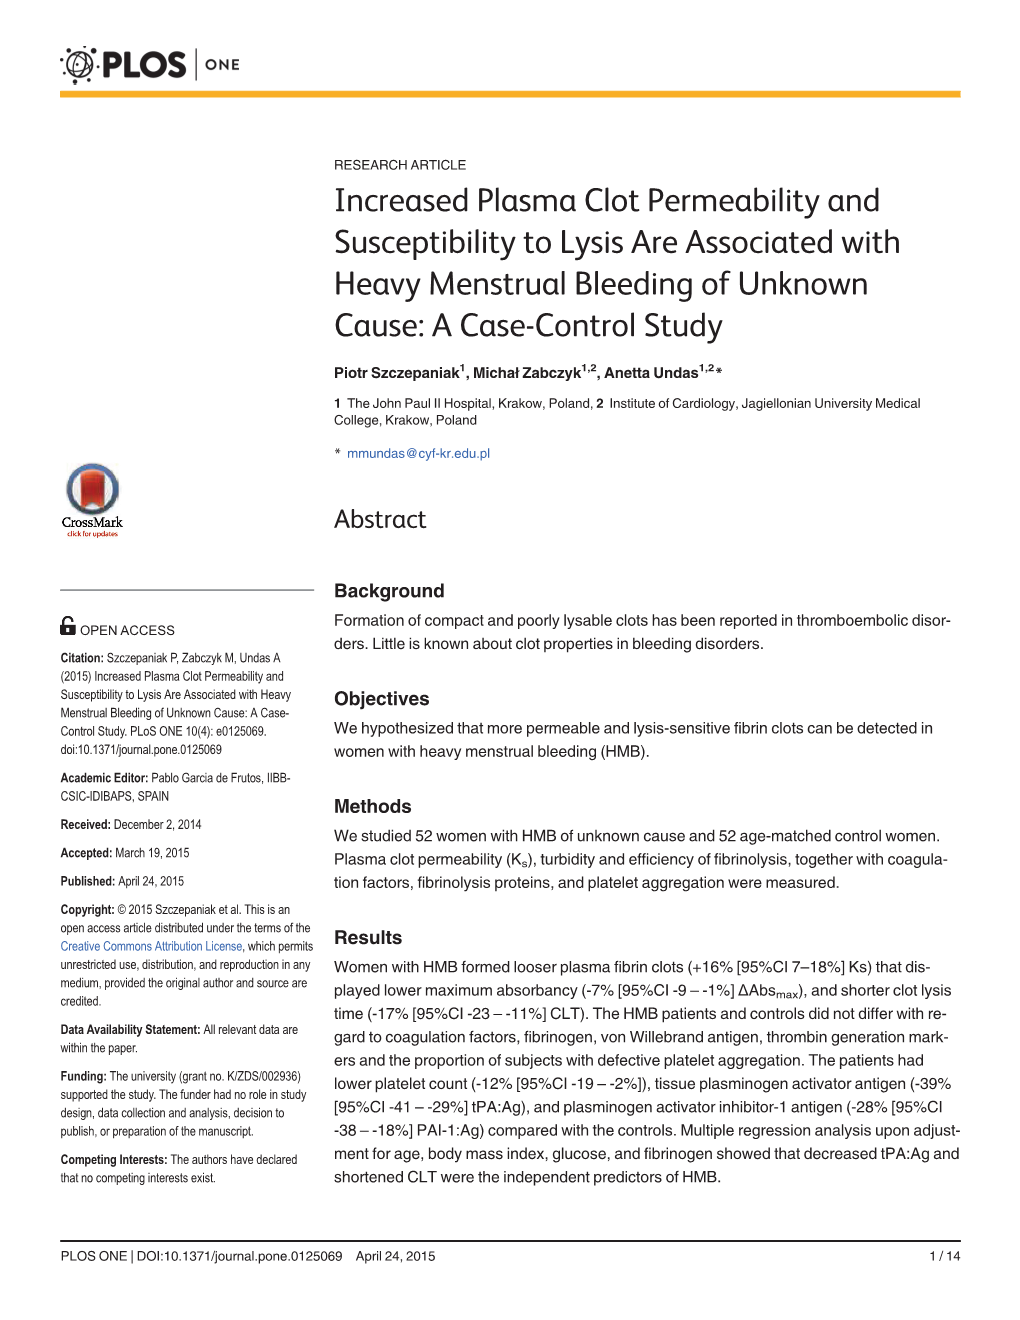 Increased Plasma Clot Permeability and Susceptibility to Lysis Are Associated with Heavy Menstrual Bleeding of Unknown Cause: a Case-Control Study